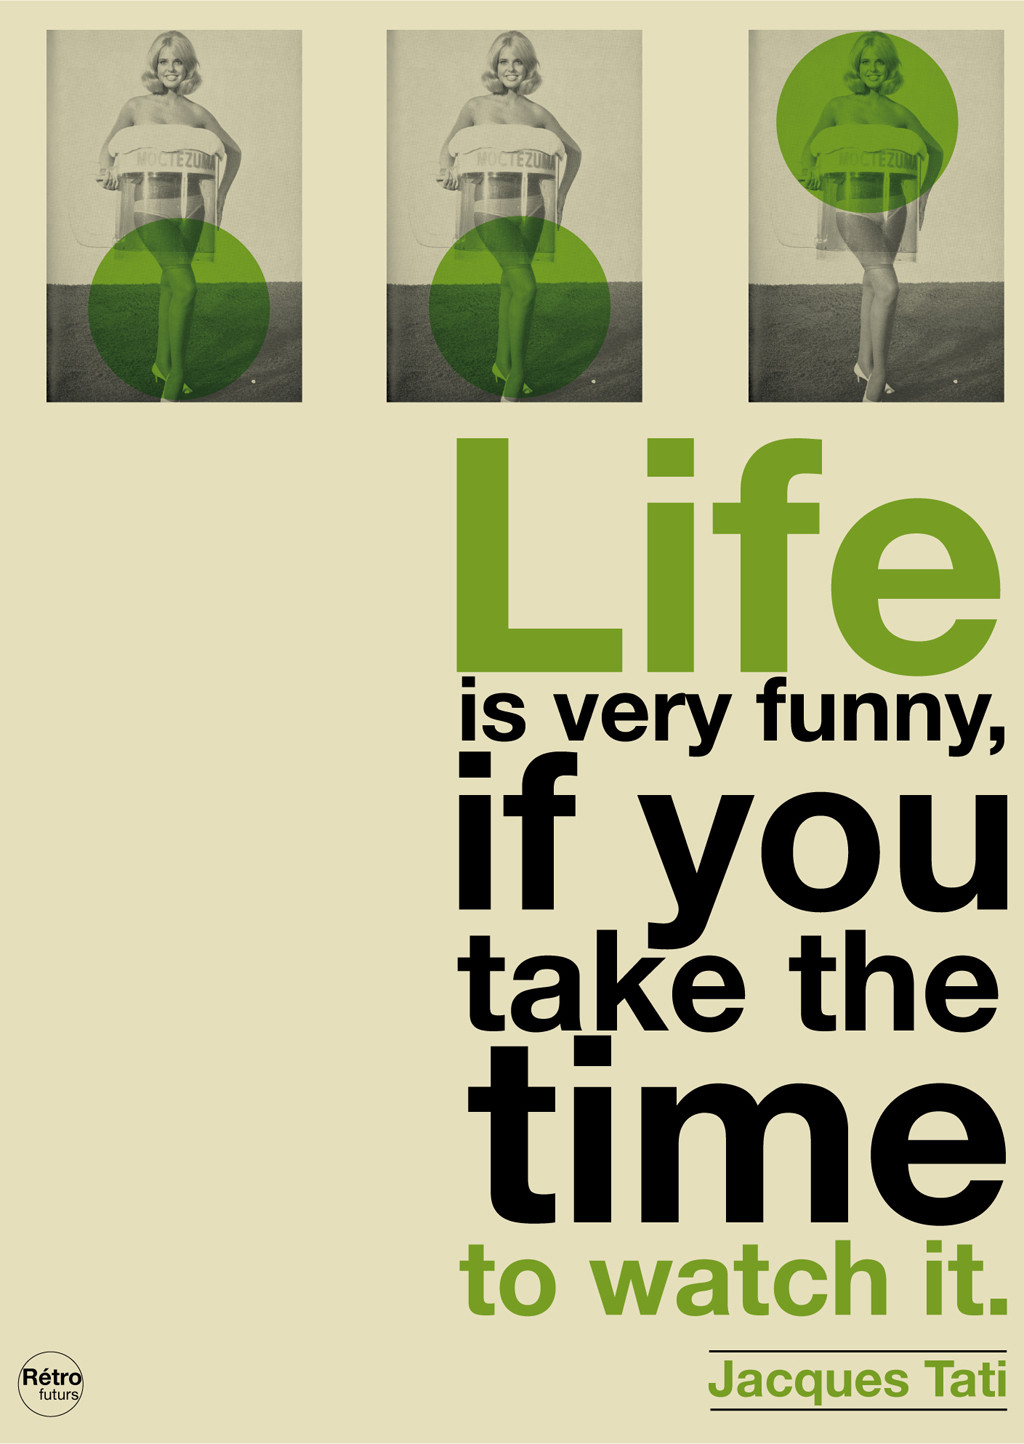 Humorous Quotes About Life
 A Peek Line Life in Time